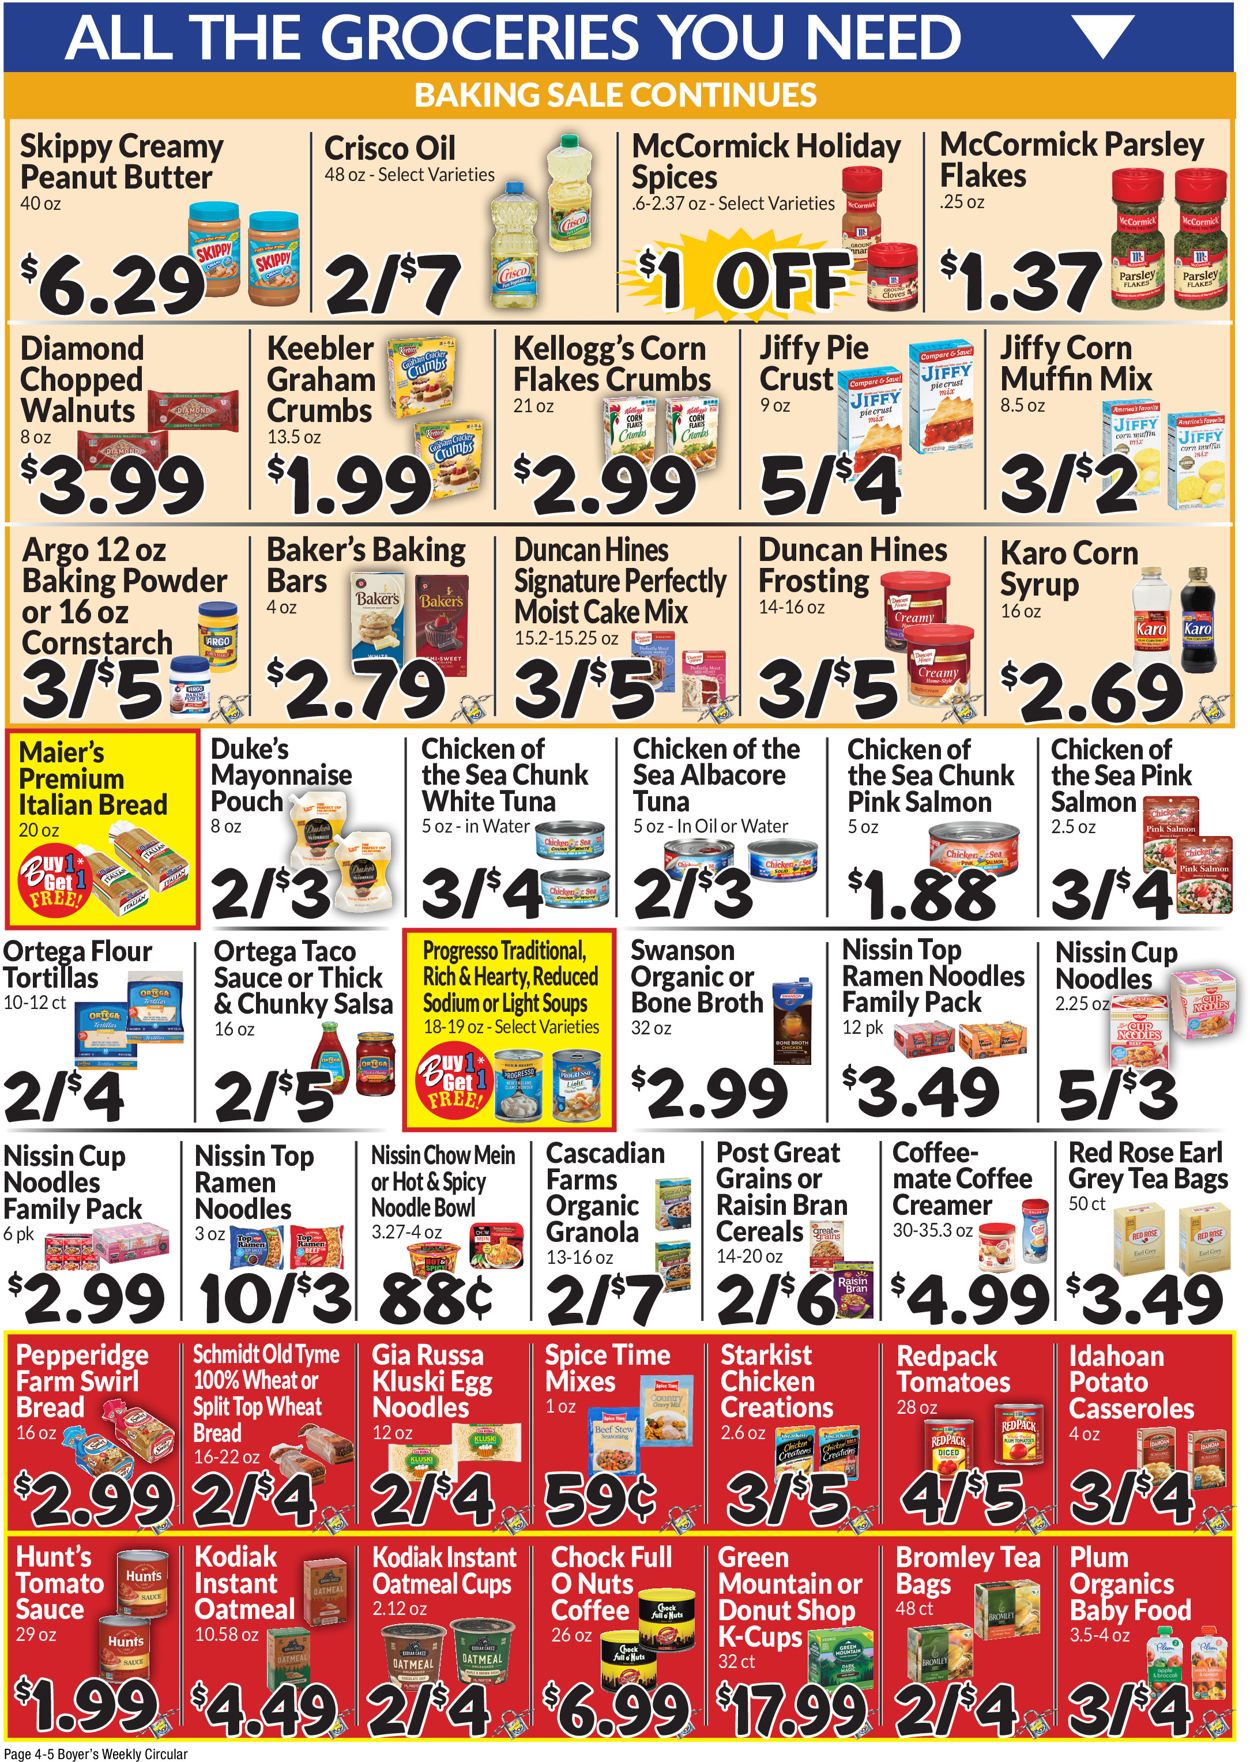 Boyer's Food Markets - Cyber Monday 2020 Weekly Ad Circular - valid 11/29-12/05/2020 (Page 6)